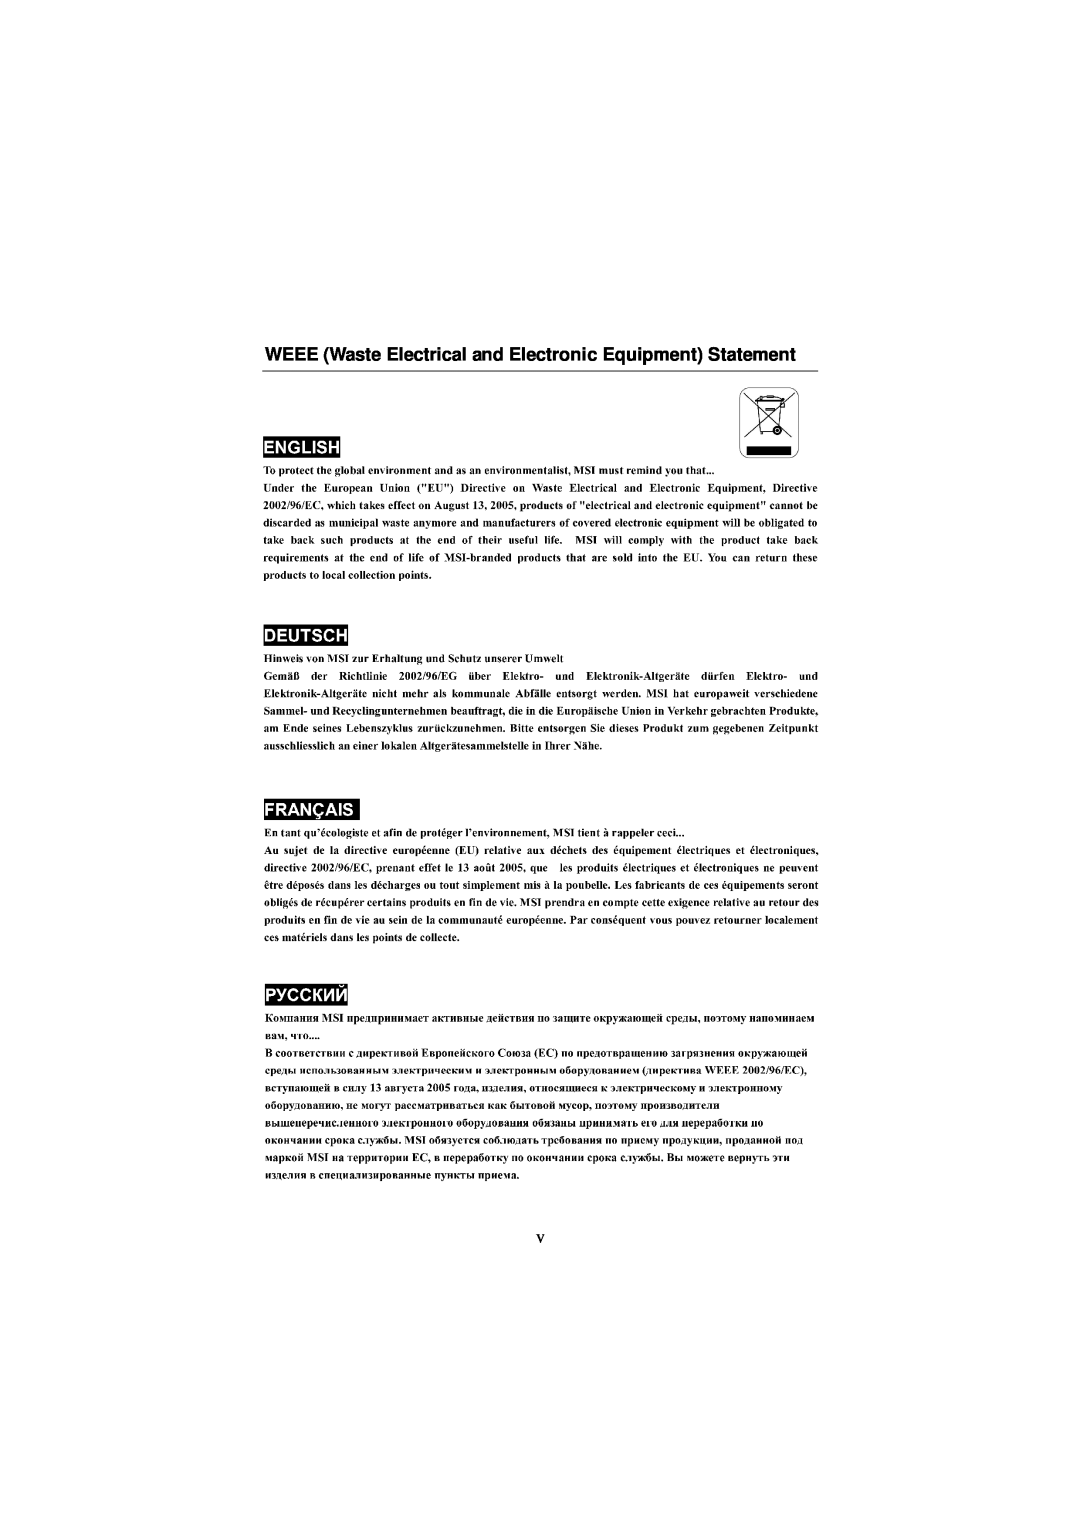 Nvidia MS-7374 manual WEEE Waste Electrical and Electronic Equipment Statement 